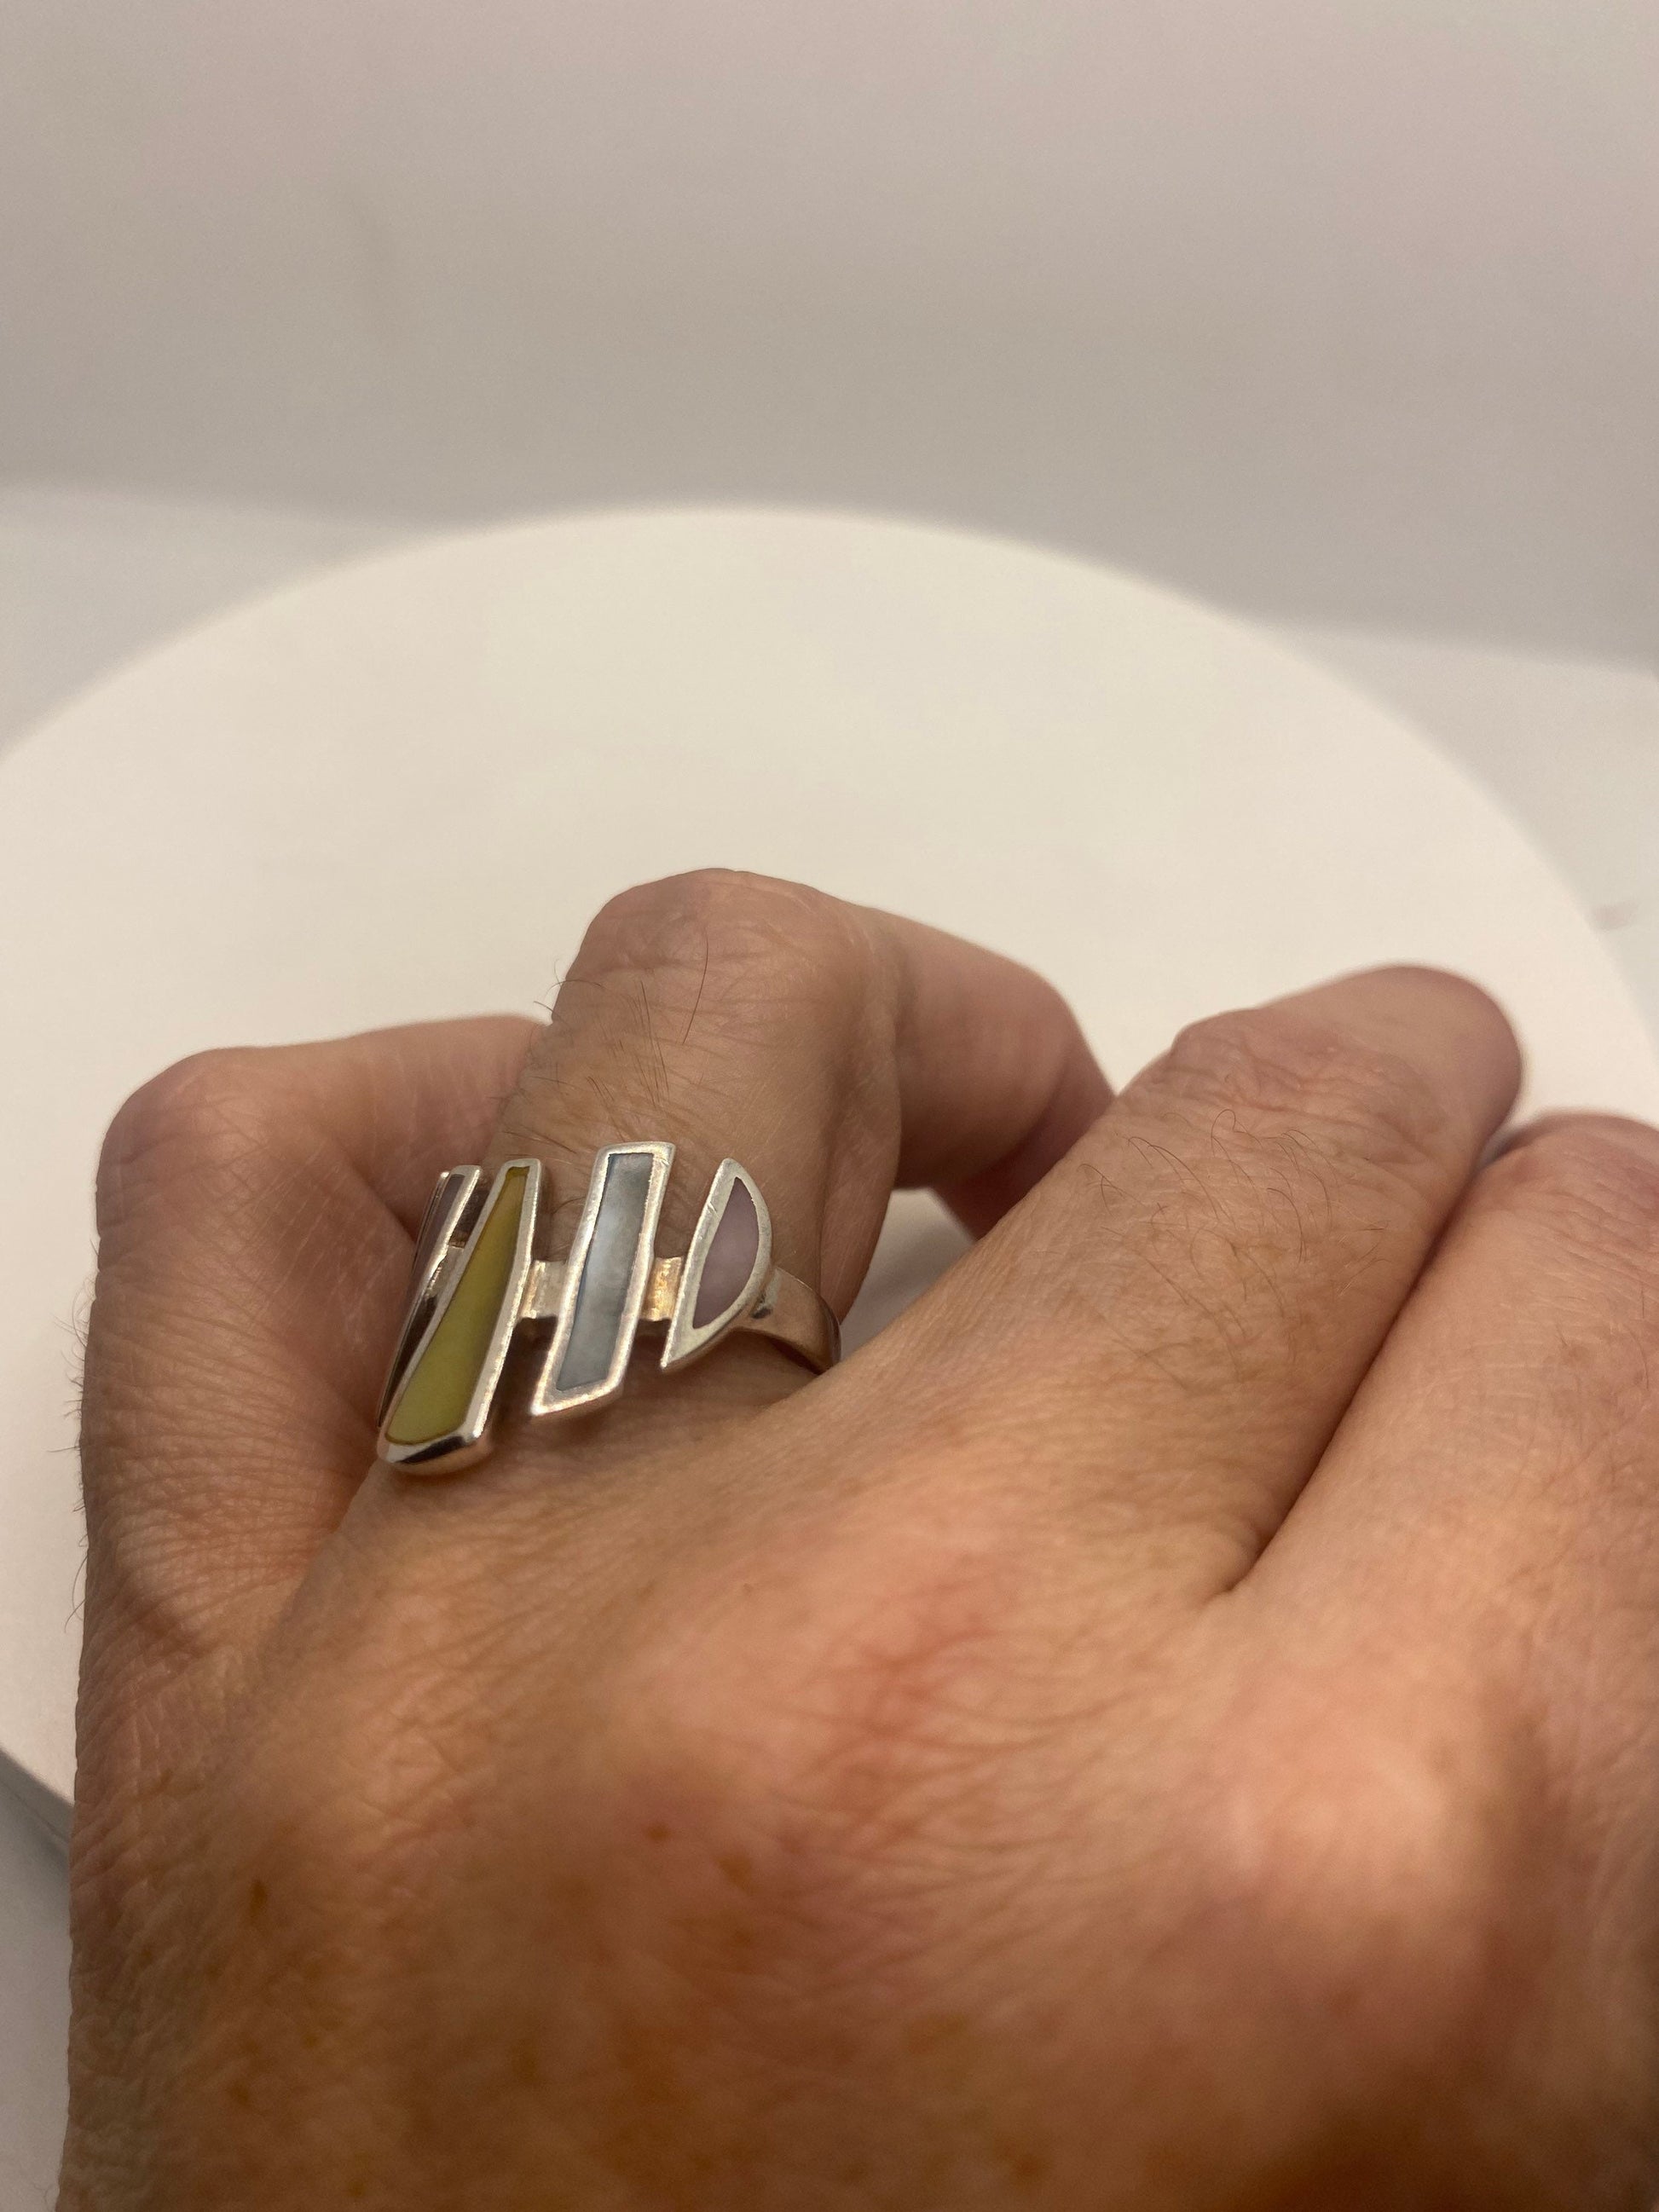 Vintage Mother of Pearl Wing 925 Sterling Silver Ring